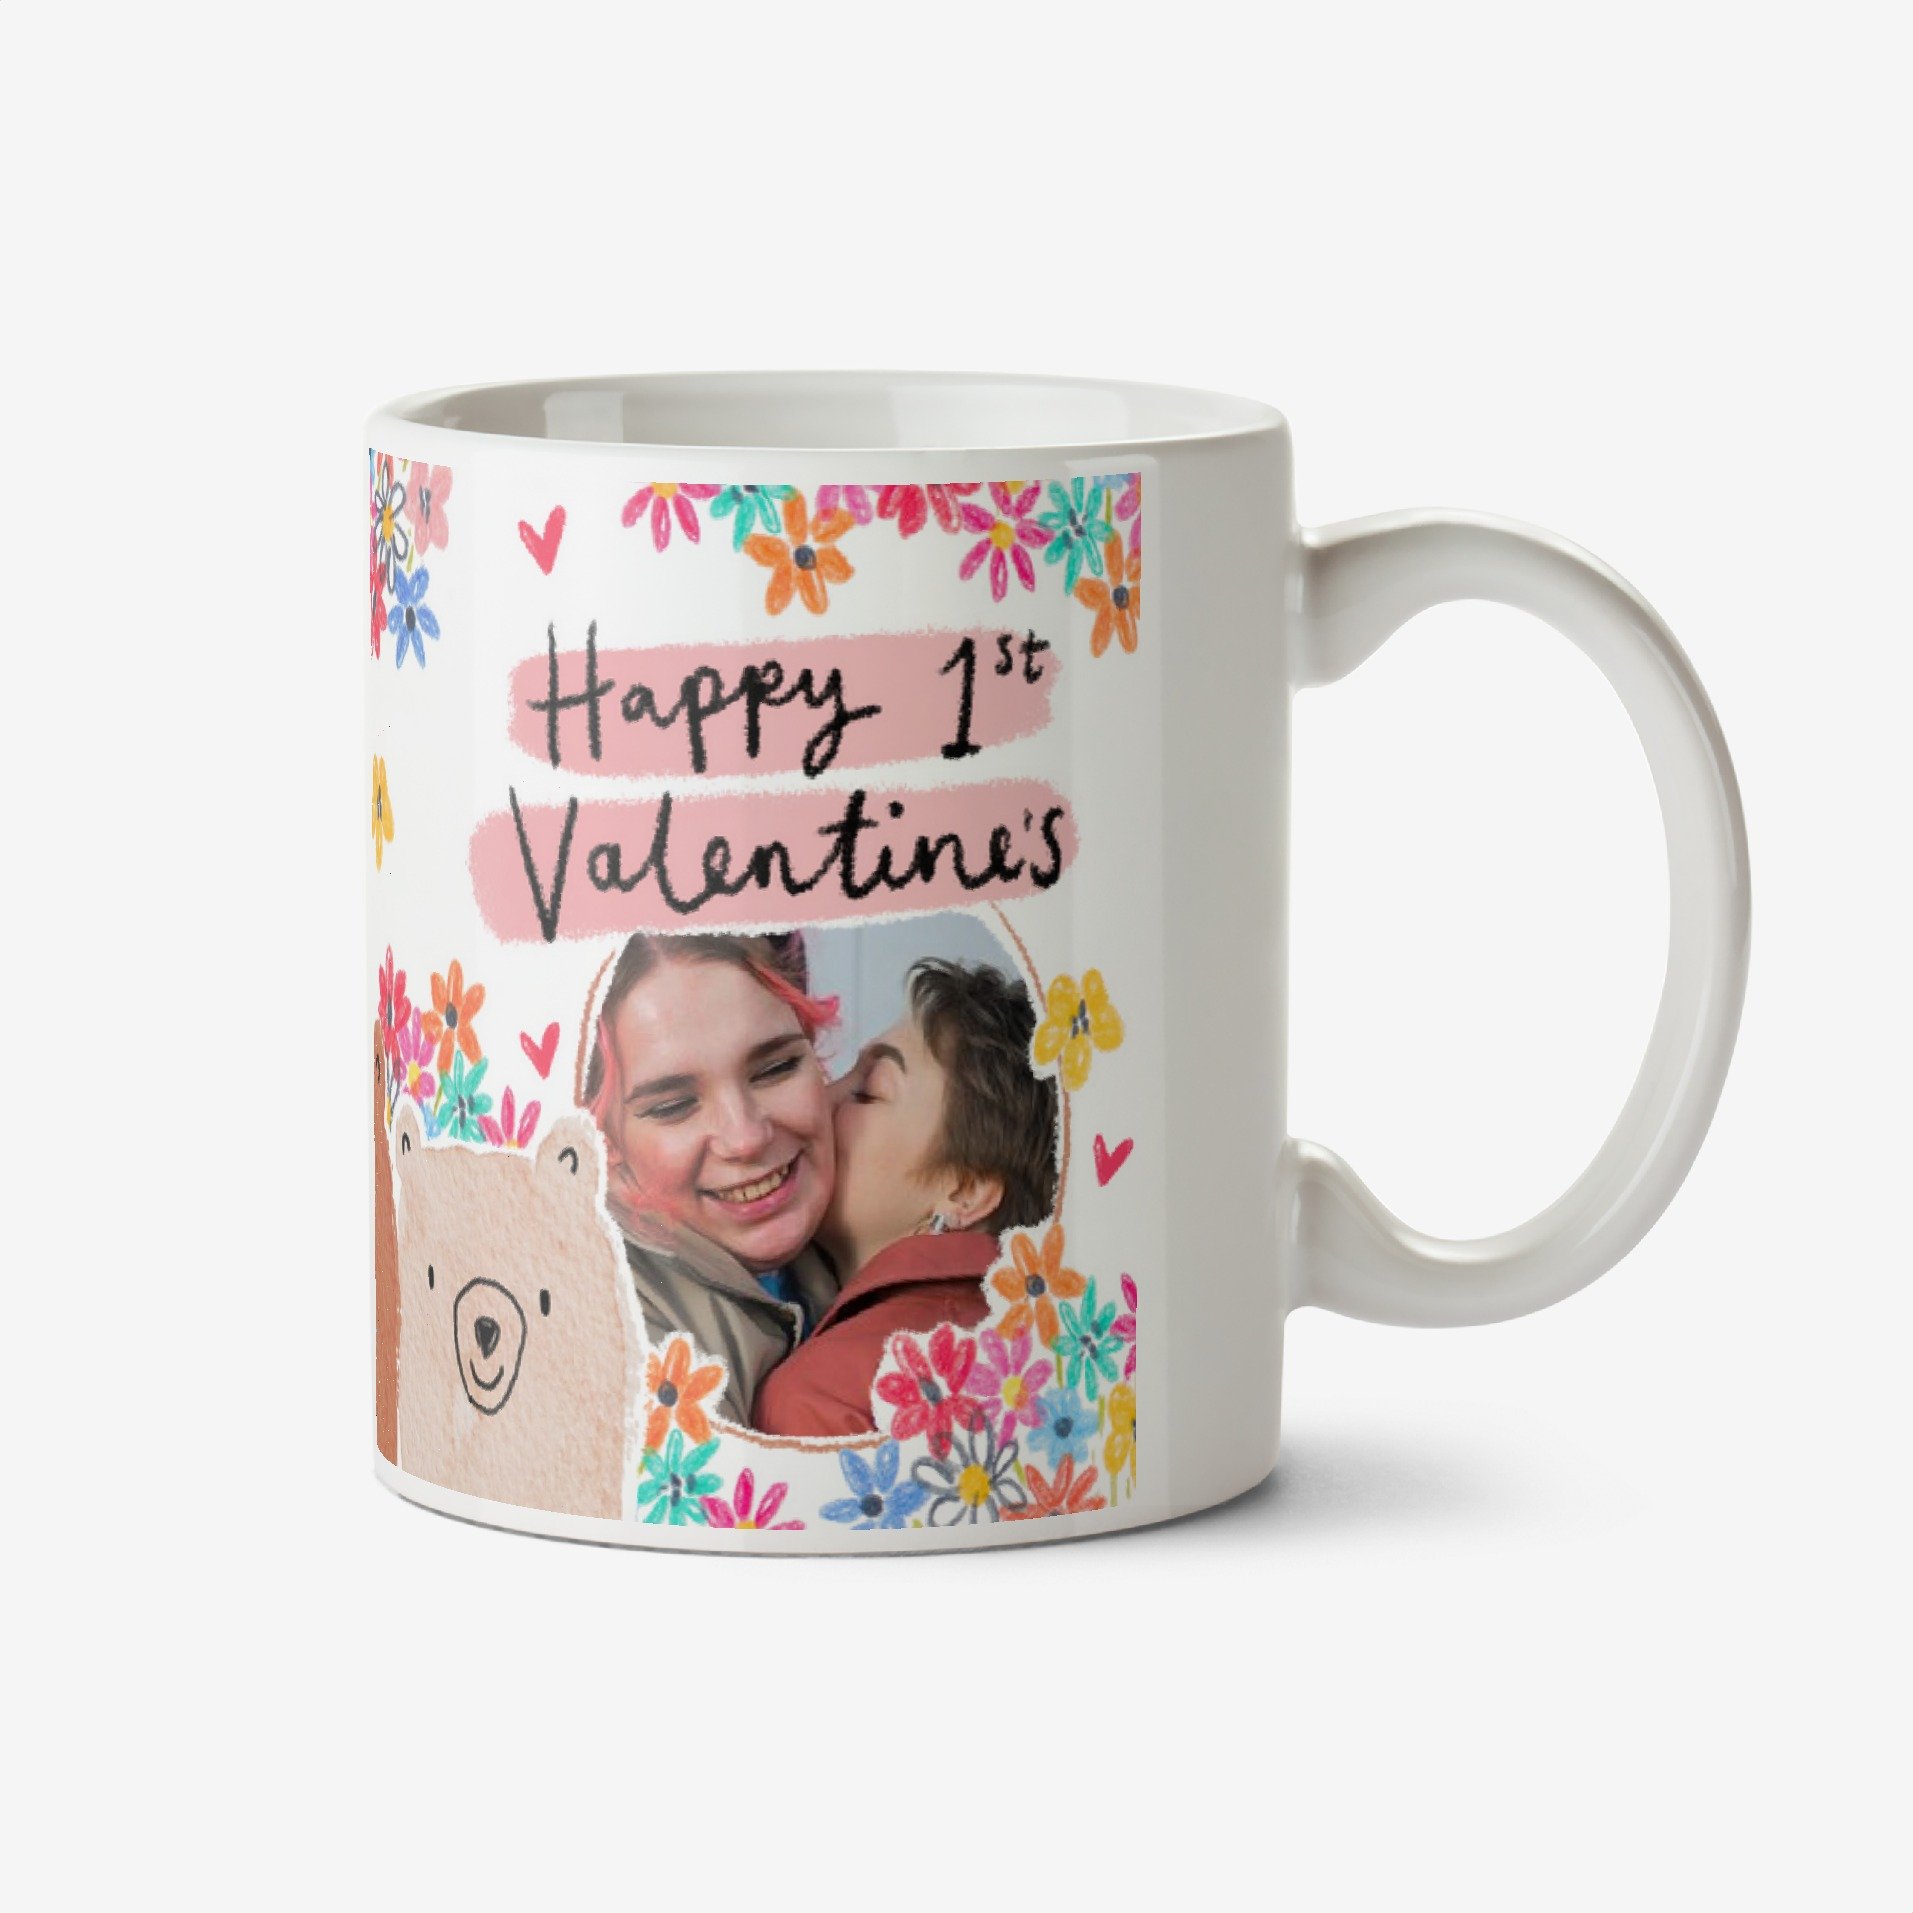 Moonpig Cute Illustration Of Two Bears And Flowers Happy First Valentine's Photo Upload Mug Ceramic 